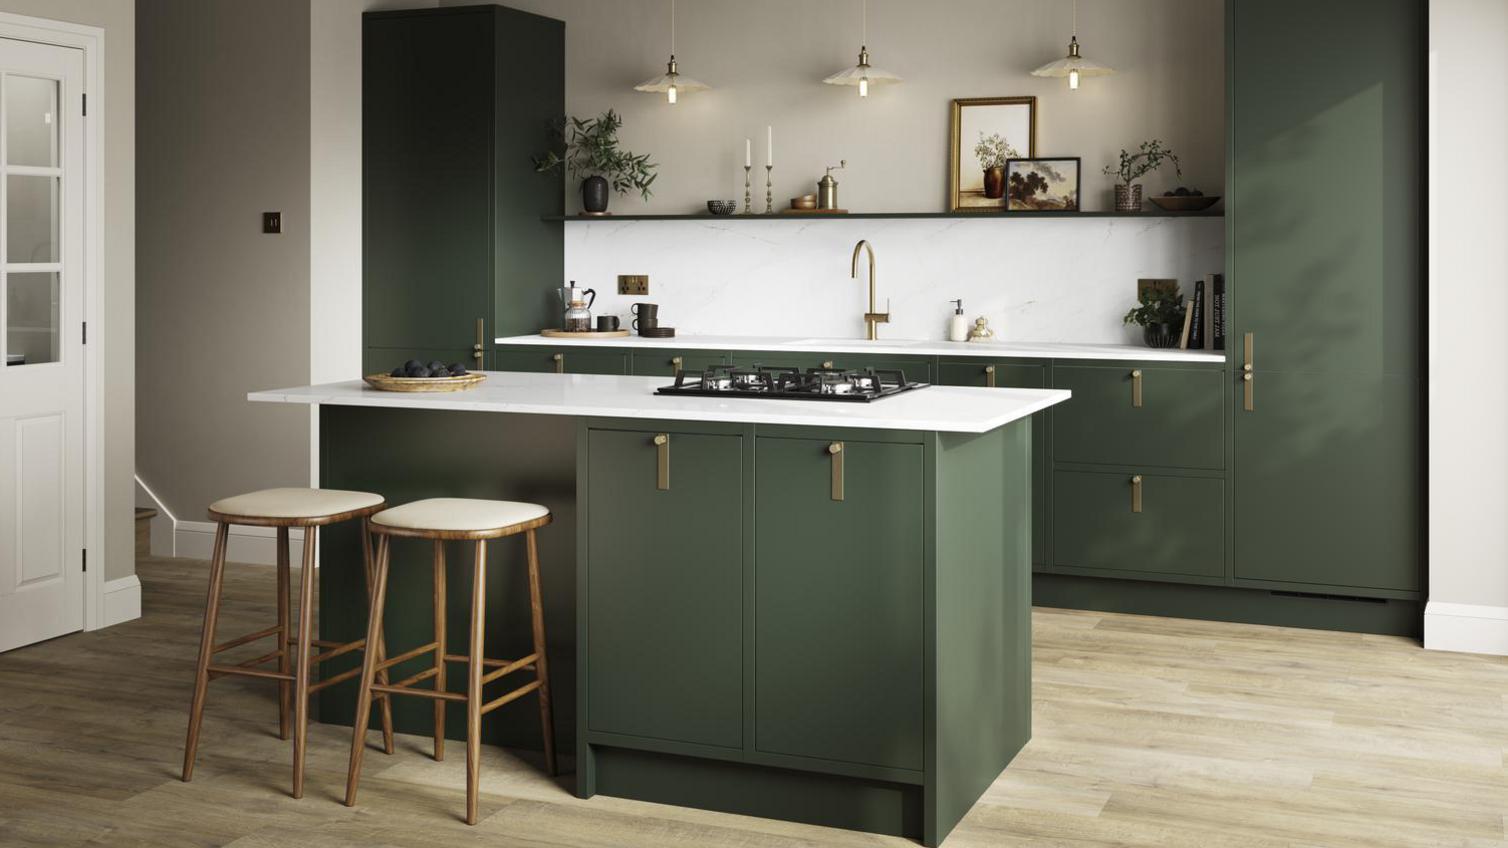 A green, slab kitchen, with an island, in frame design. It has a white counter, and wooden stools, used to create a sitting area.